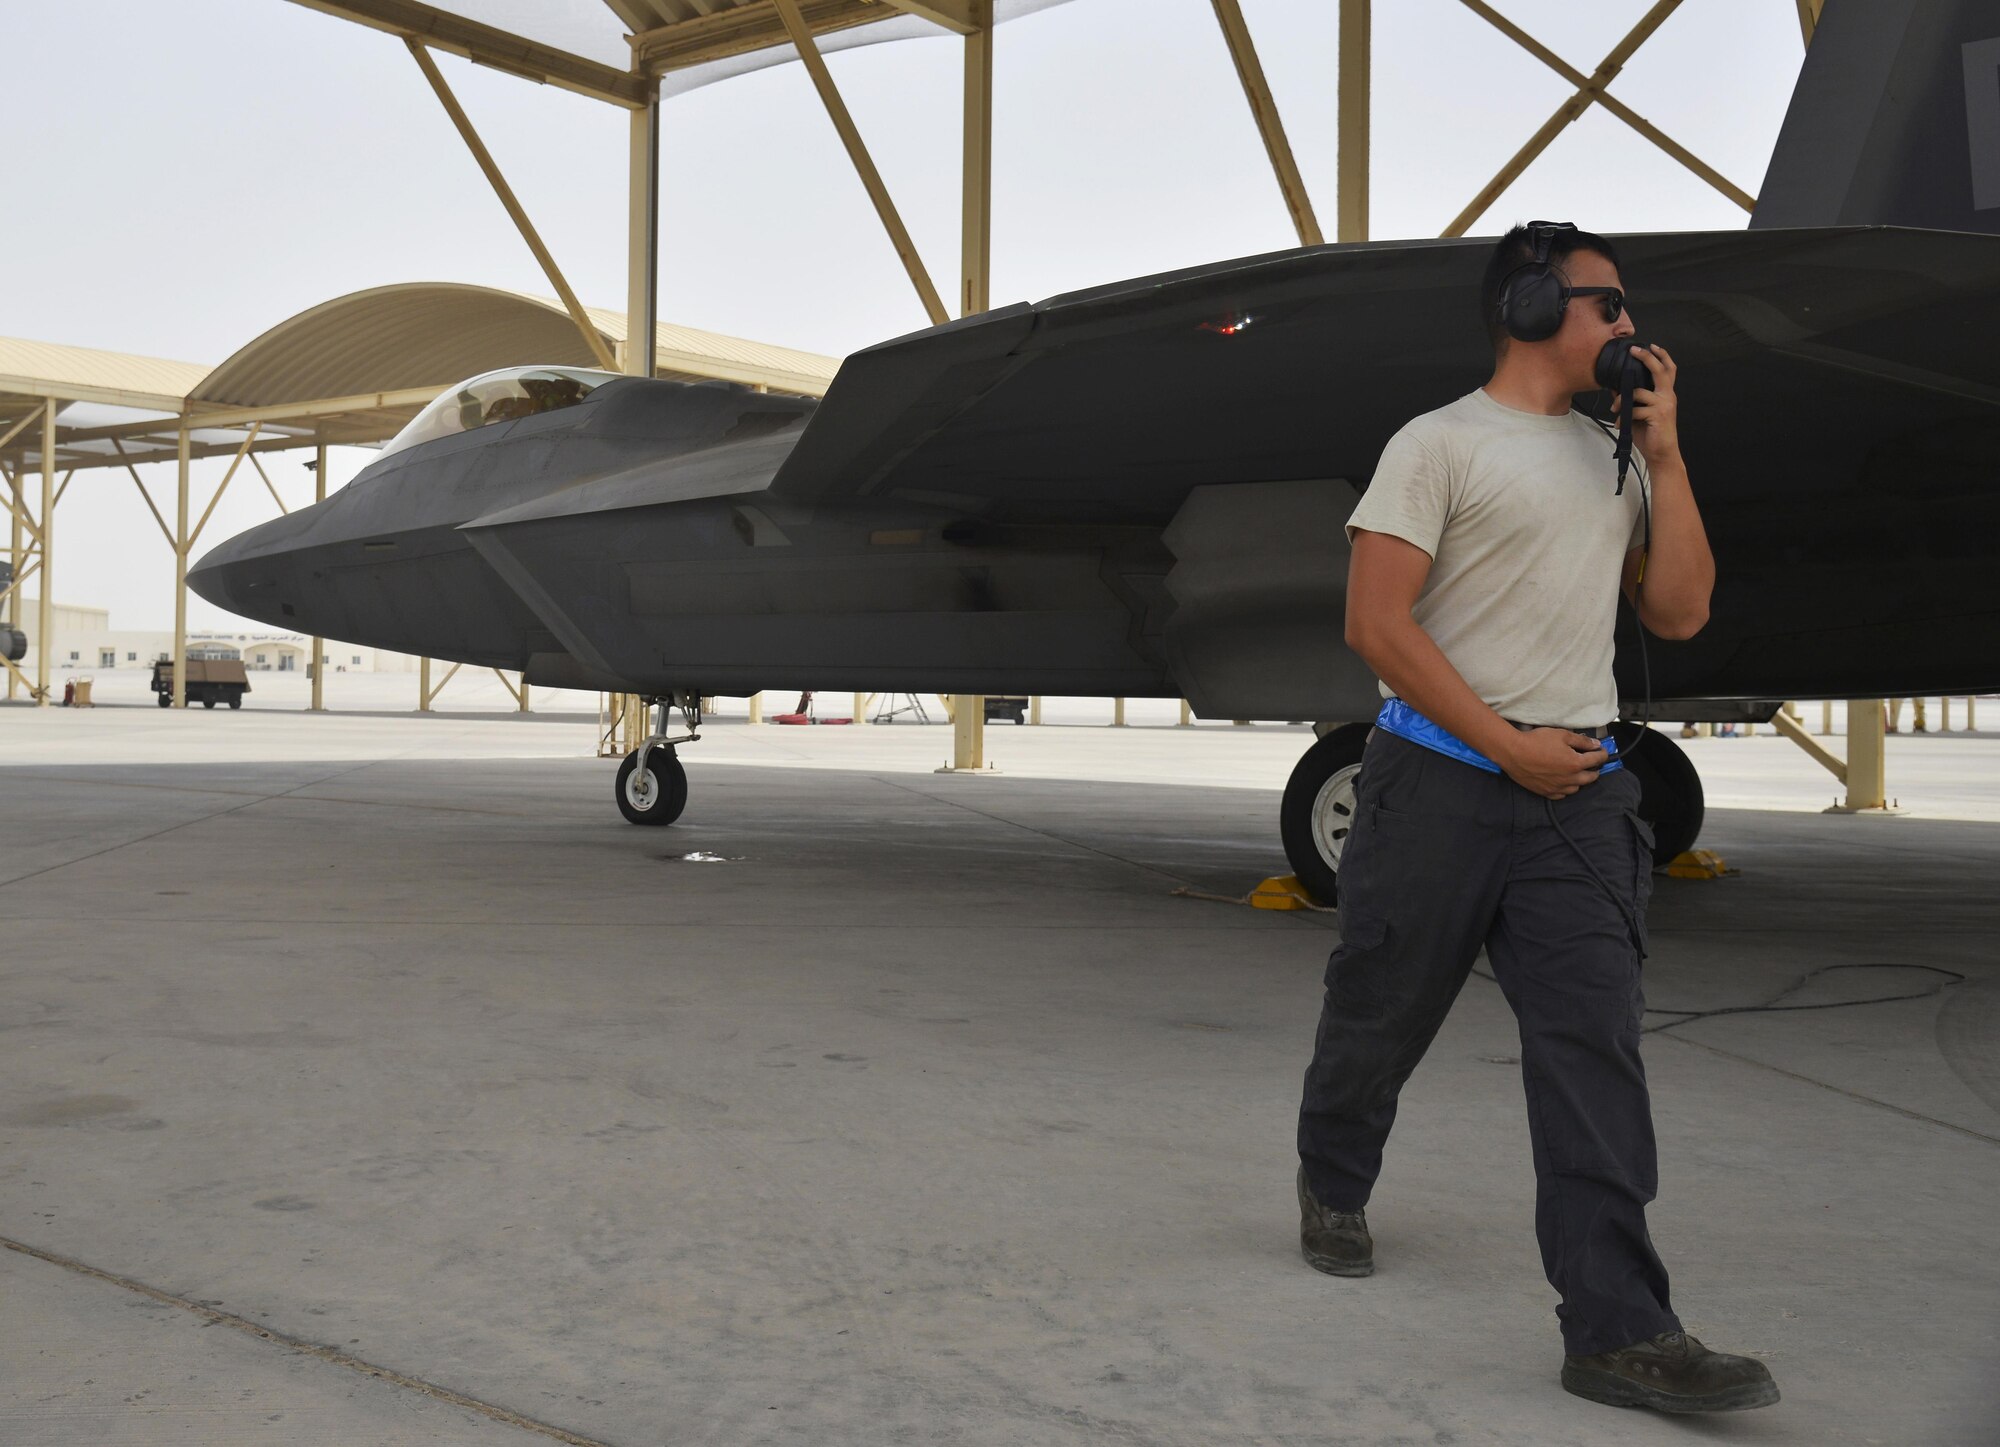 A crew chief performs prelaunch procedures on an F-22 Raptor at an undisclosed location in Southwest Asia July 9, 2015. The F-22 is a fifth-generation aircraft and is designed to engage in air-to-air and air-to-ground missions. (U.S. Air Force photo/Tech. Sgt. Christopher Boitz)